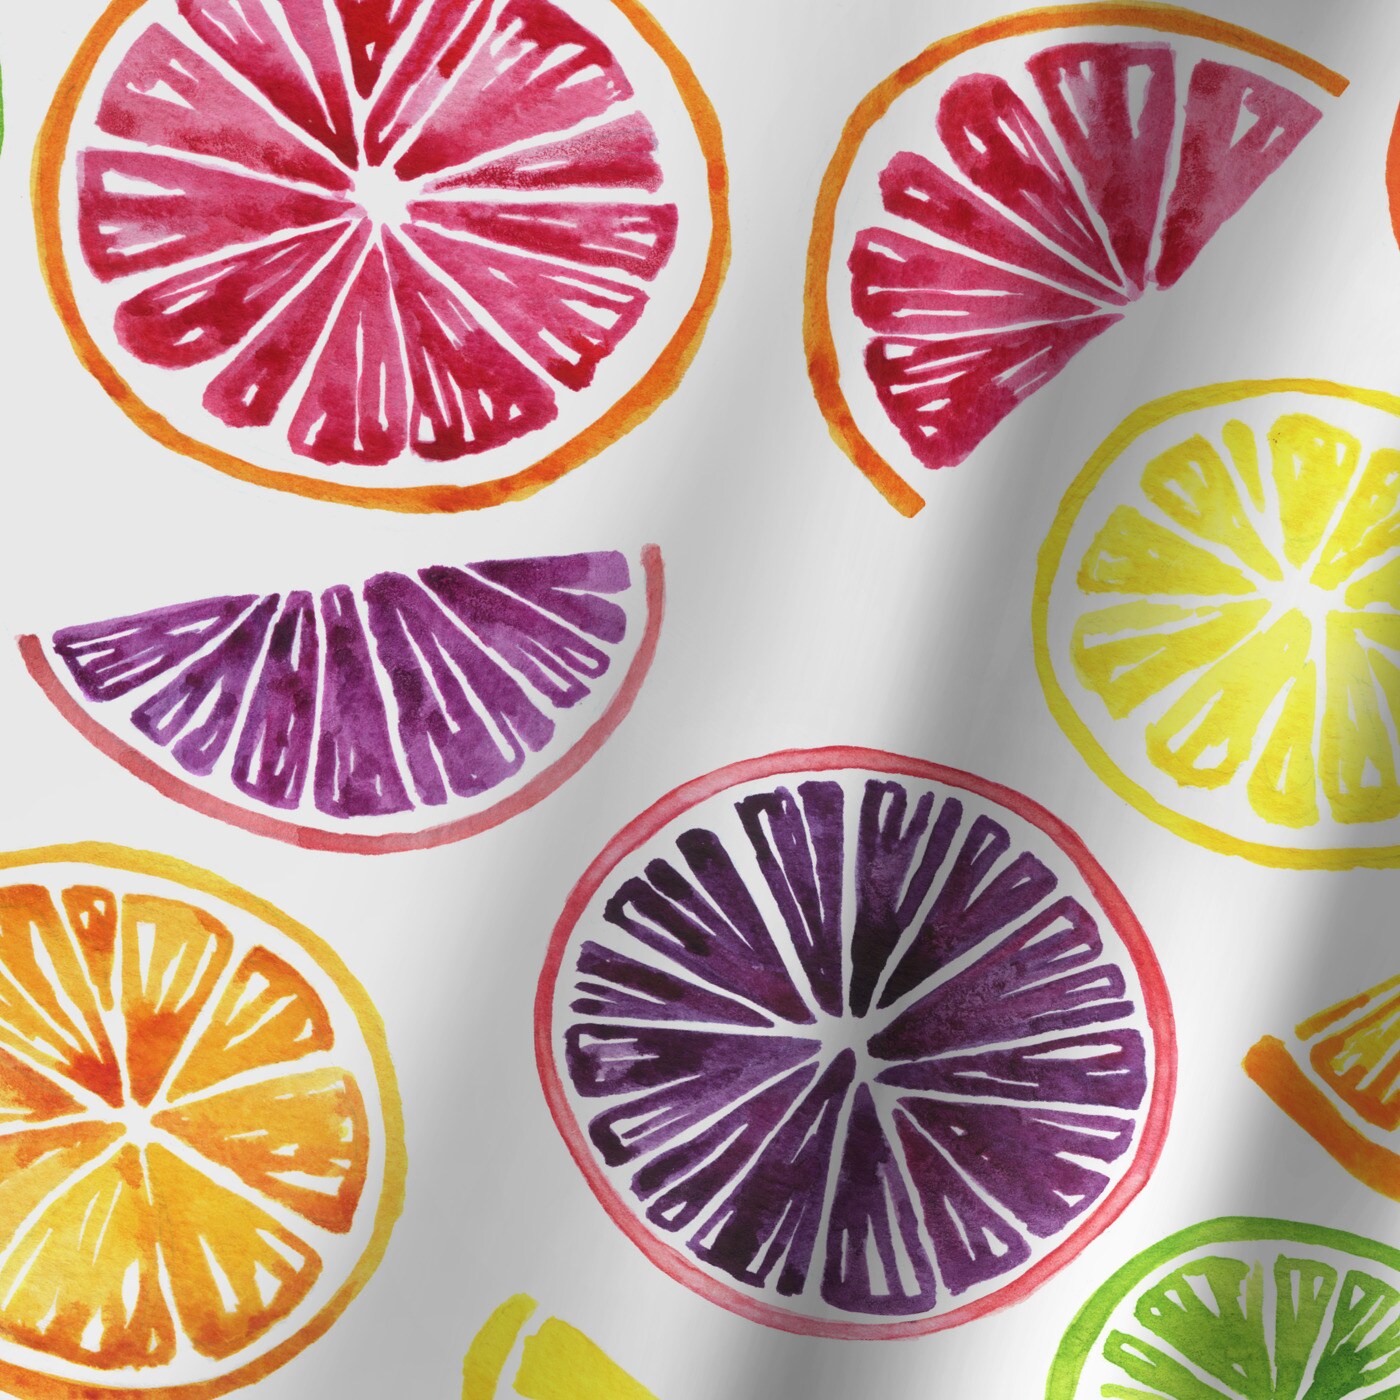 Citrus Wheels Repeat Tile Colorful White by Sam Nagel Blackout Rod Pocket Single Curtain Shade Panel 50x84